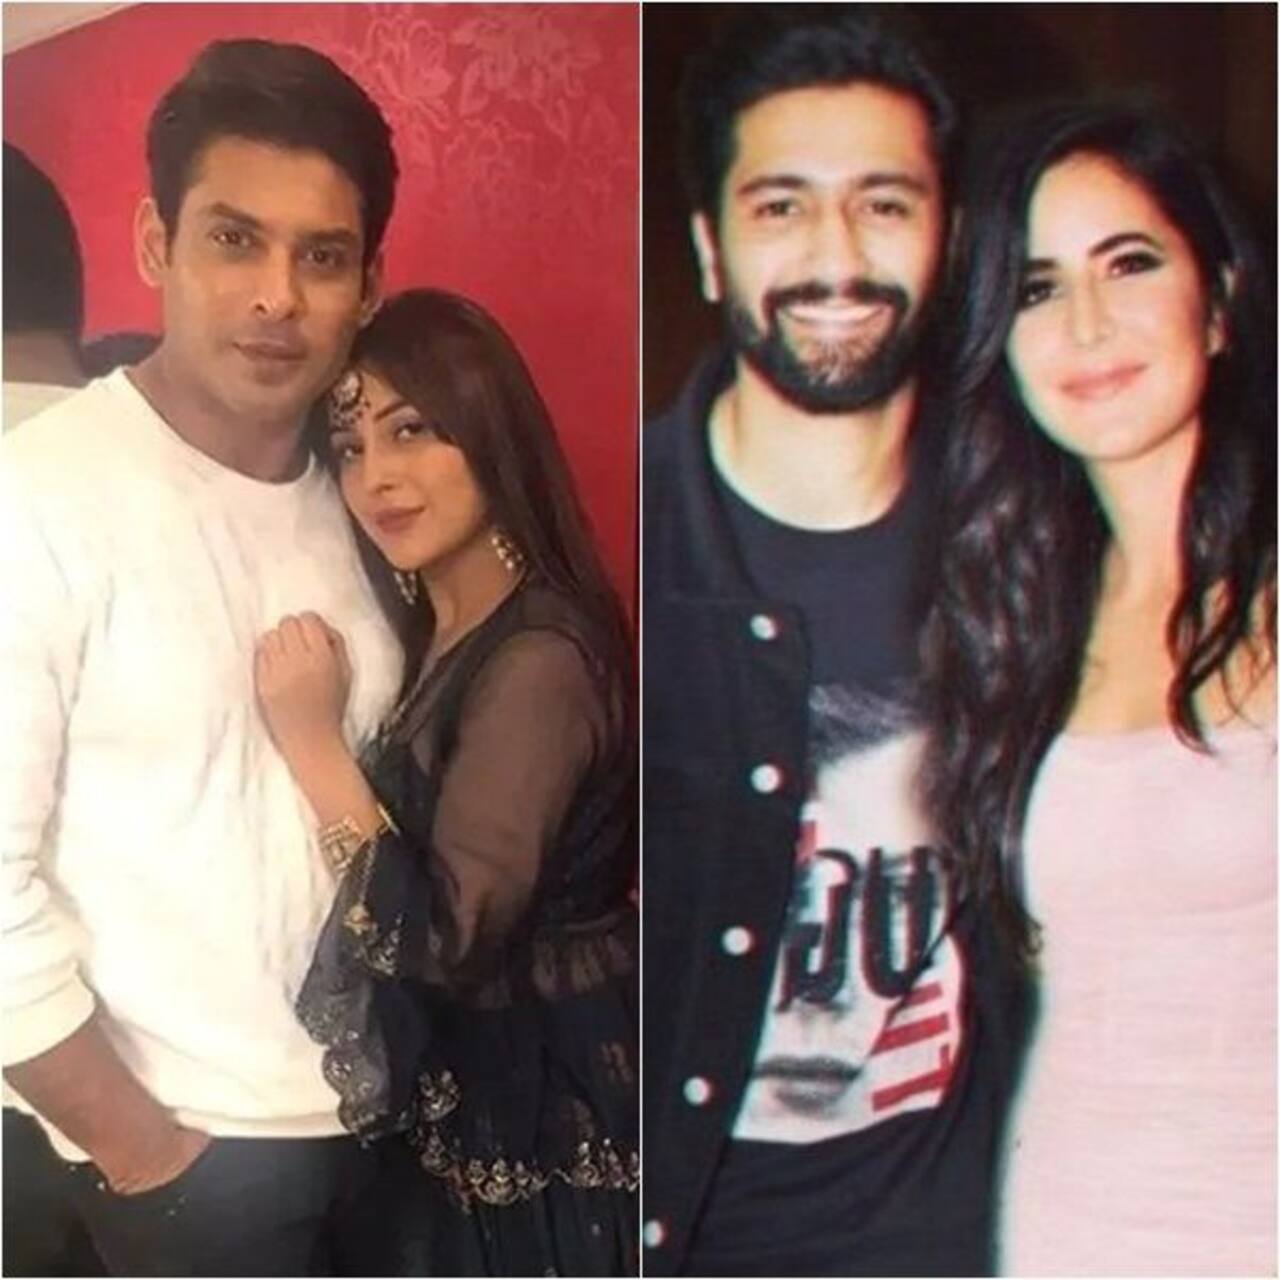 Trending Entertainment News Today: Shehnaaz Gill wanted to marry Sidharth Shukla; Vicky Kaushal-Katrina Kaif's marriage in December and more